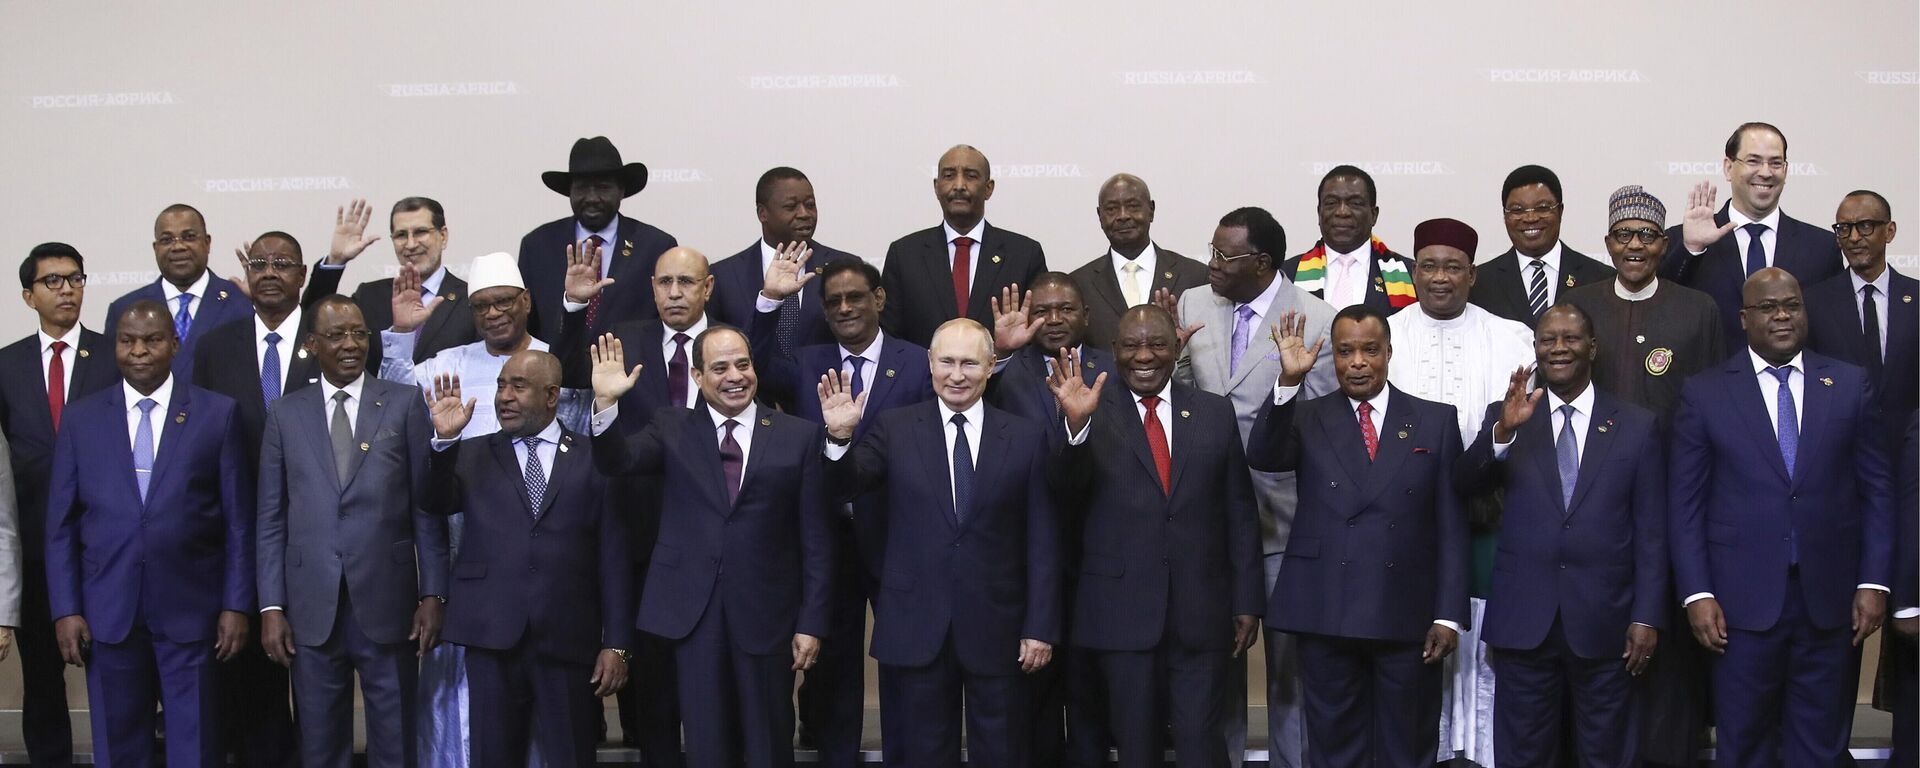 Russian President Vladimir Putin, center, poses for a photo with leaders of African countries at the Russia-Africa summit in the Black Sea resort of Sochi, Russia, Thursday, Oct. 24, 2019.  - Sputnik International, 1920, 21.02.2023